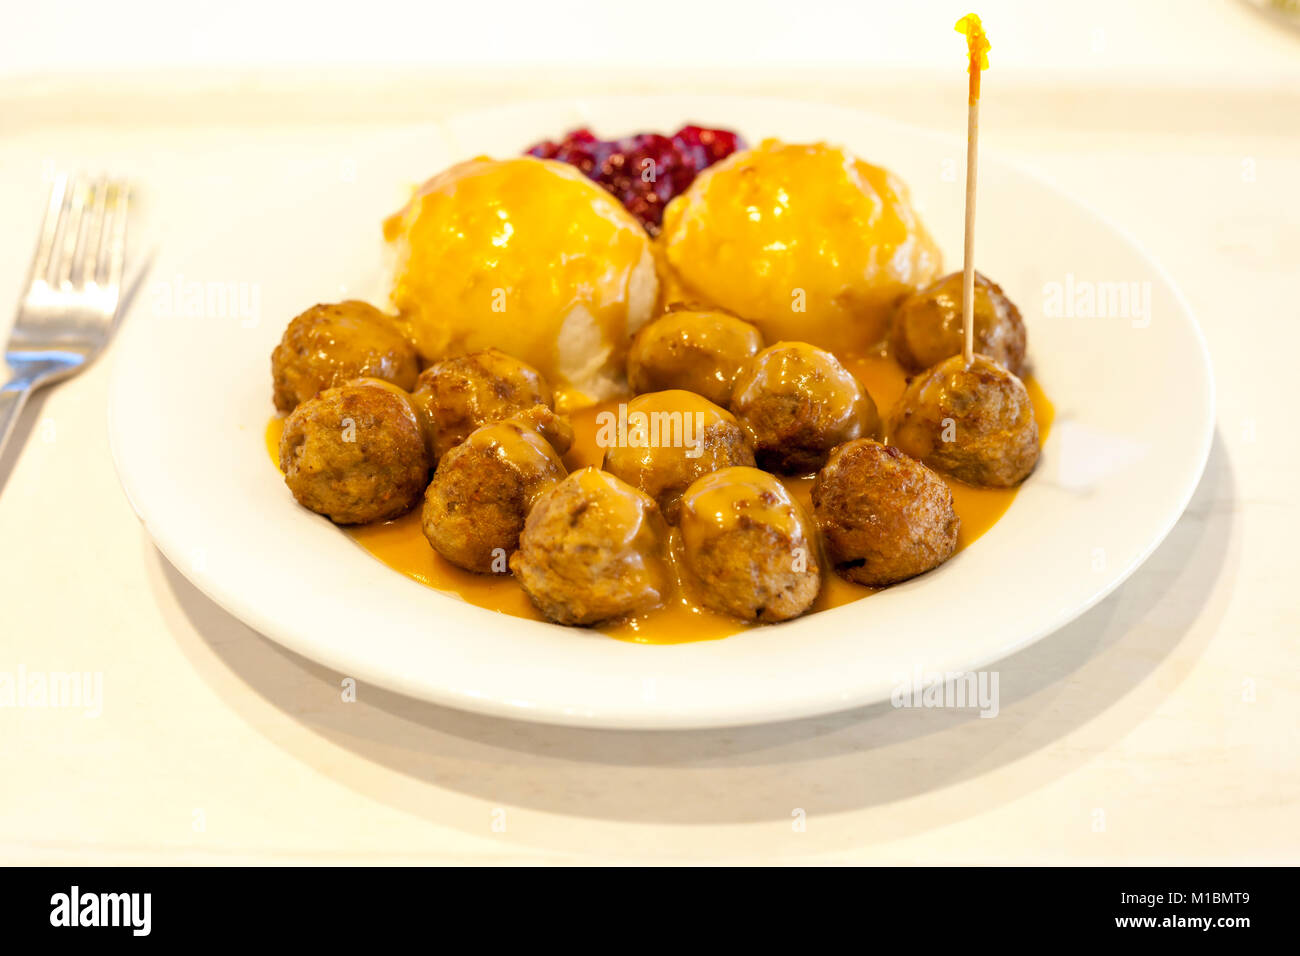 Plate of swedish meatballs with gravy and side of mash potatoes and lingonberry jam Stock Photo